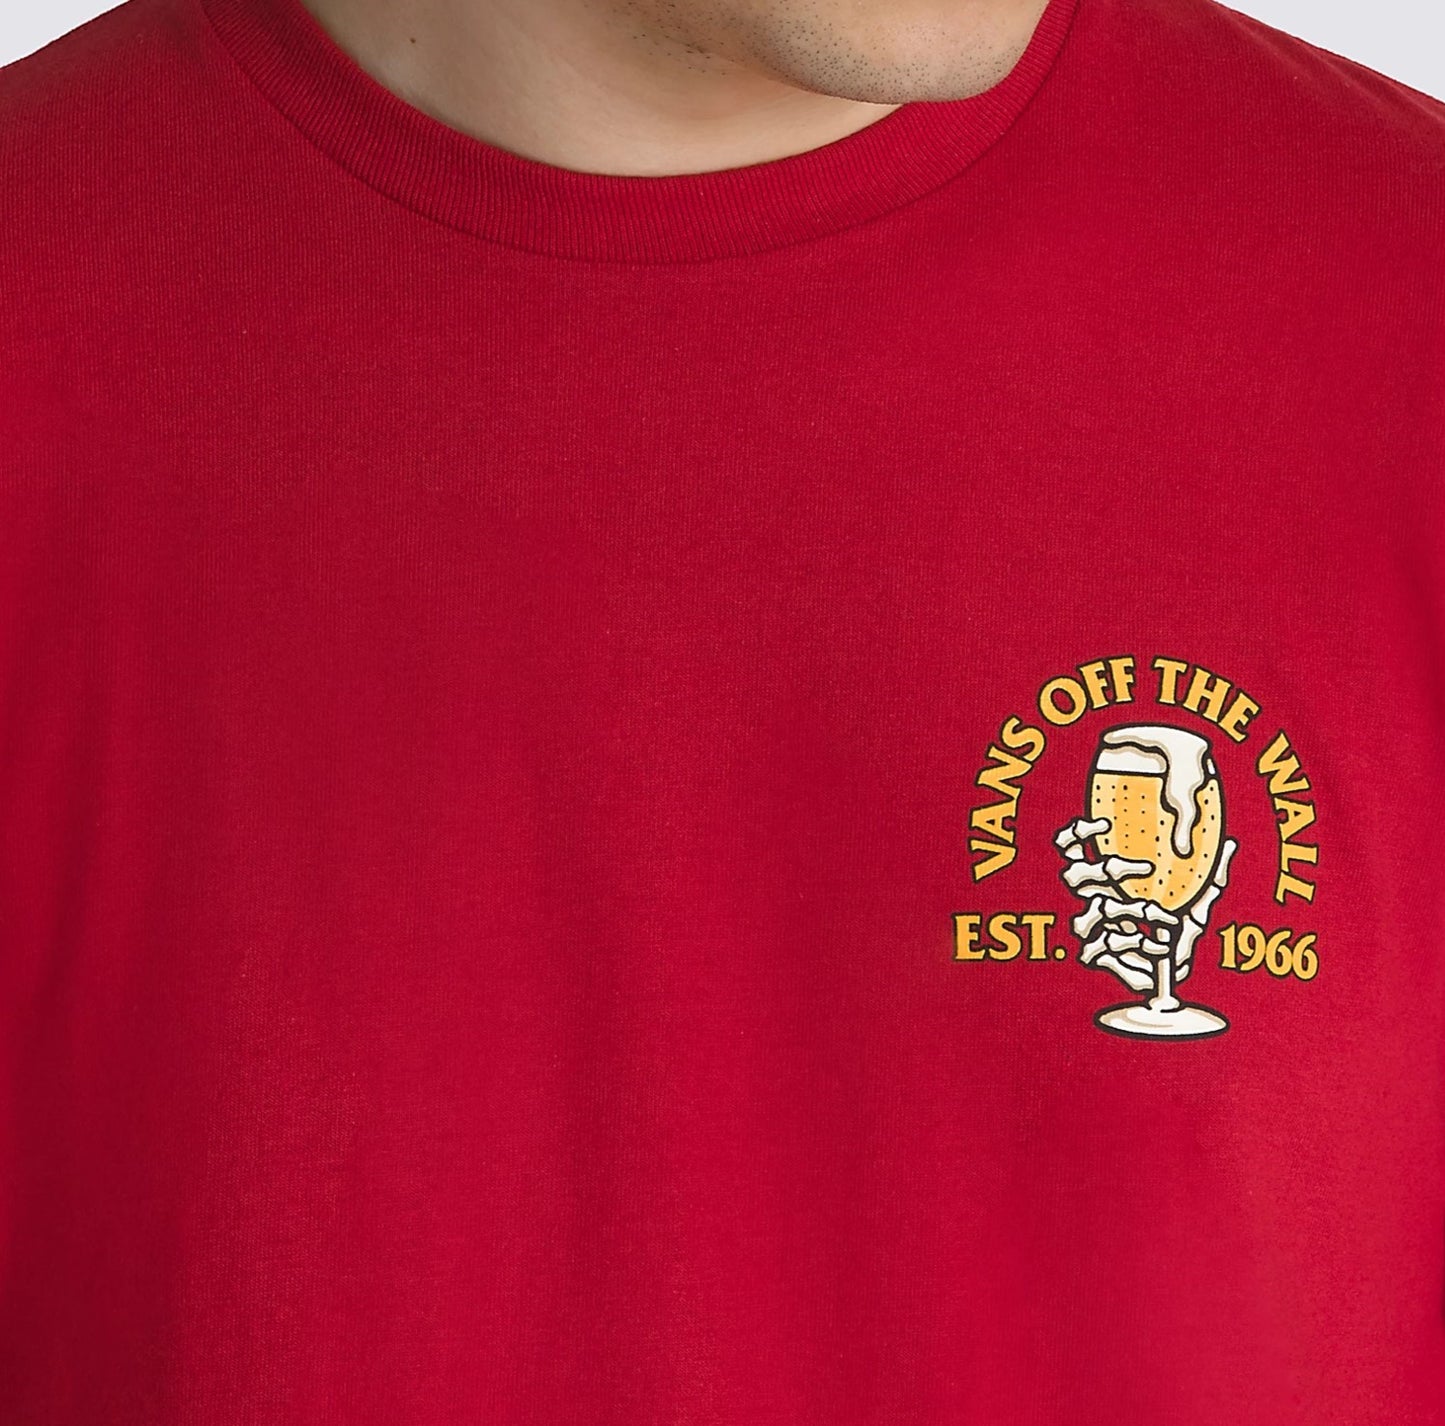 VANS Coldest in Town T-Shirt - Red